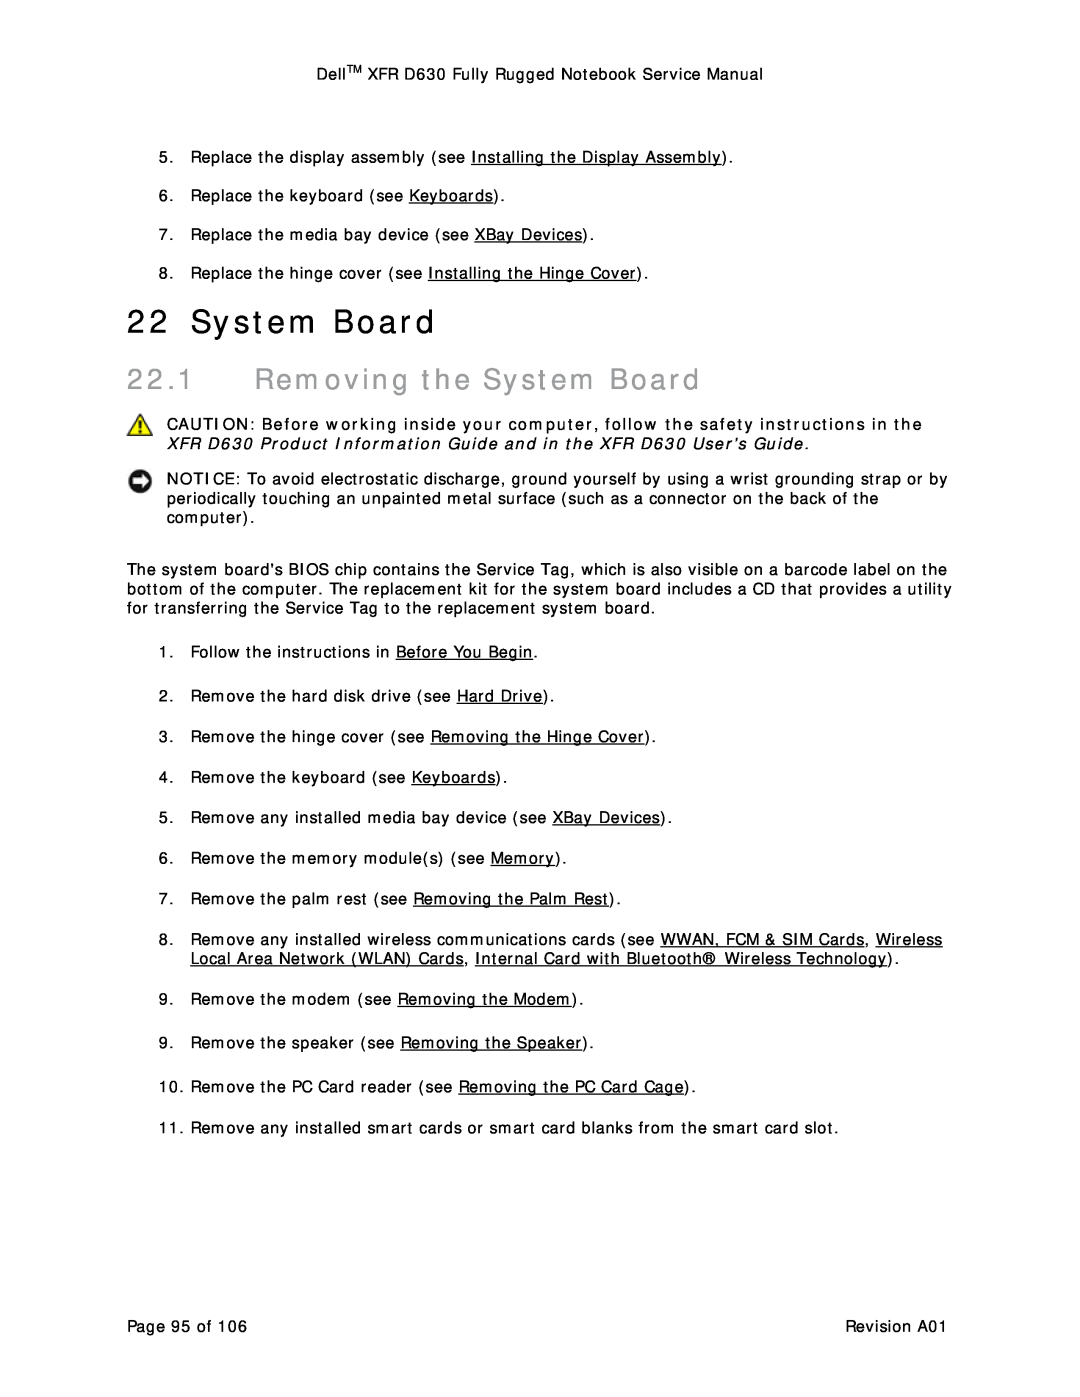 Dell D630 service manual Removing the System Board 